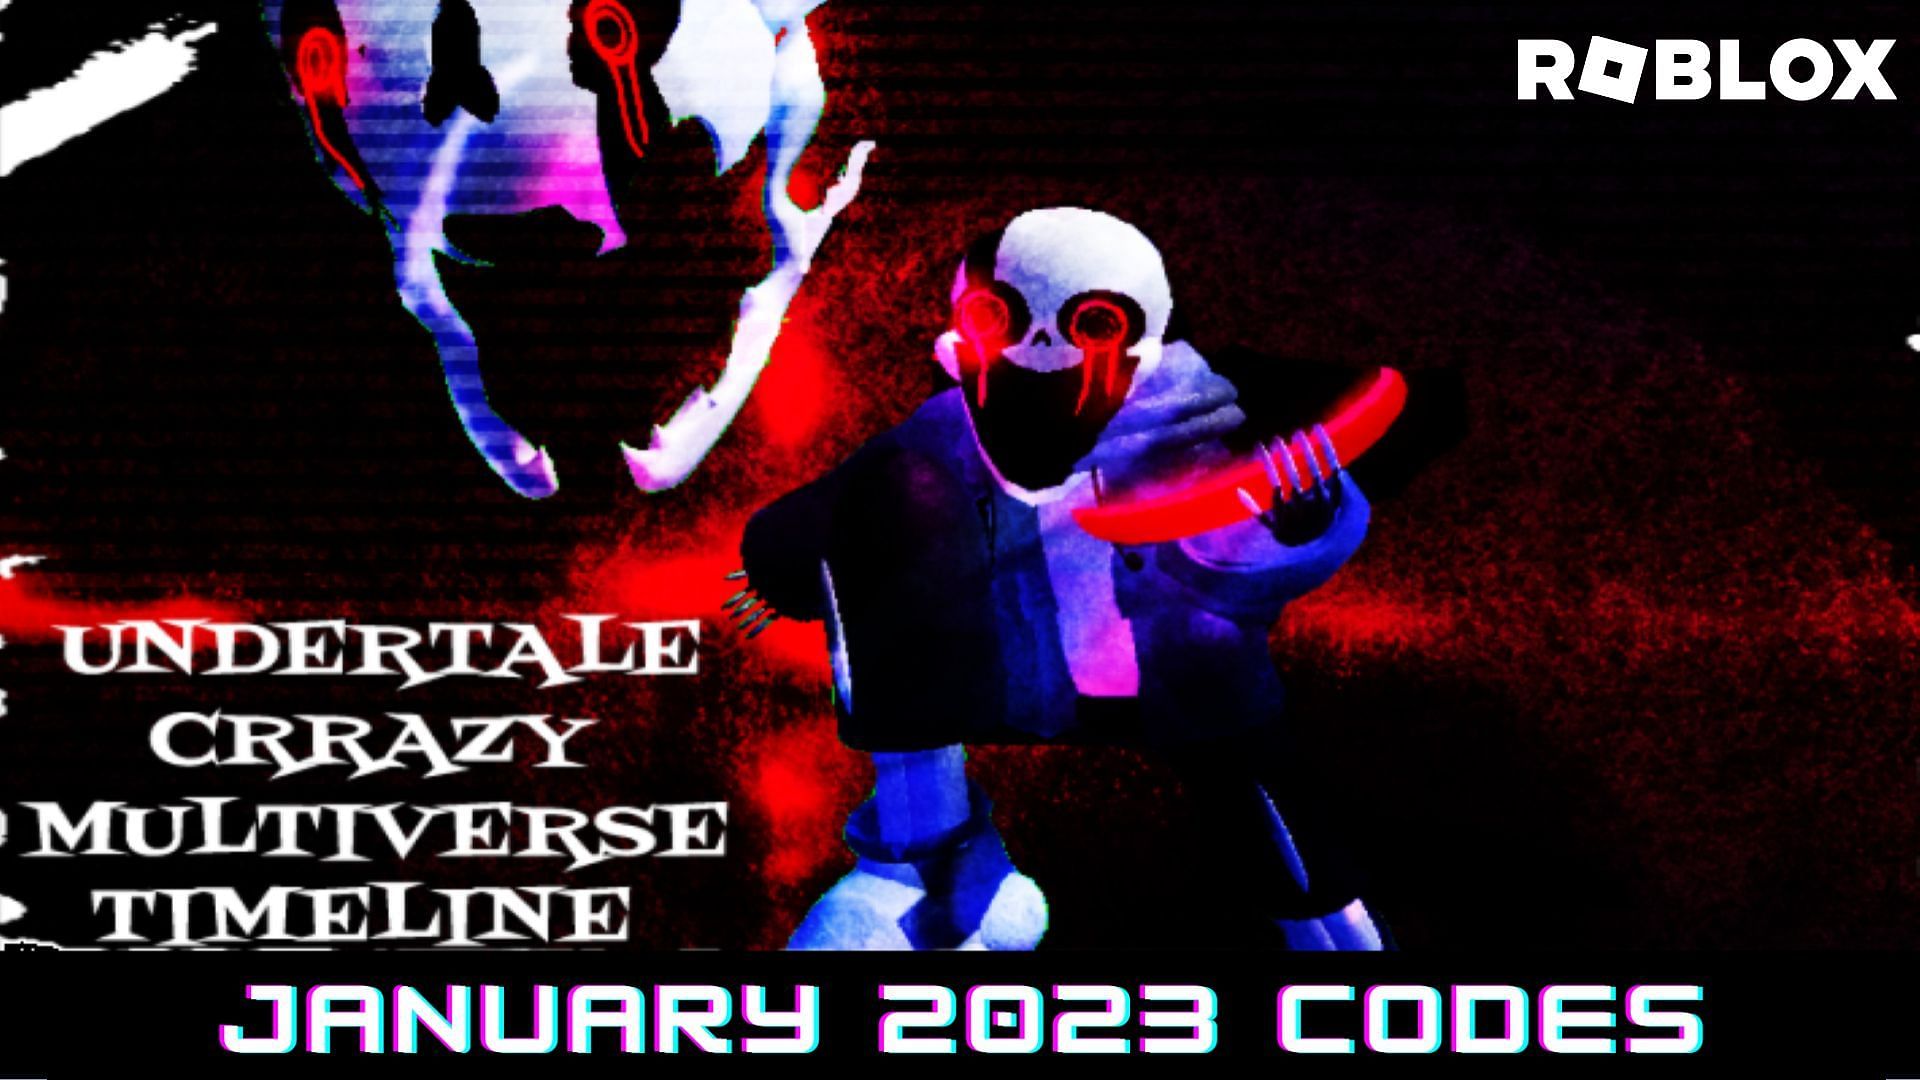 Roblox Undertale Crazy Multiverse Timeline Codes for January 2023: Free  souls and cores